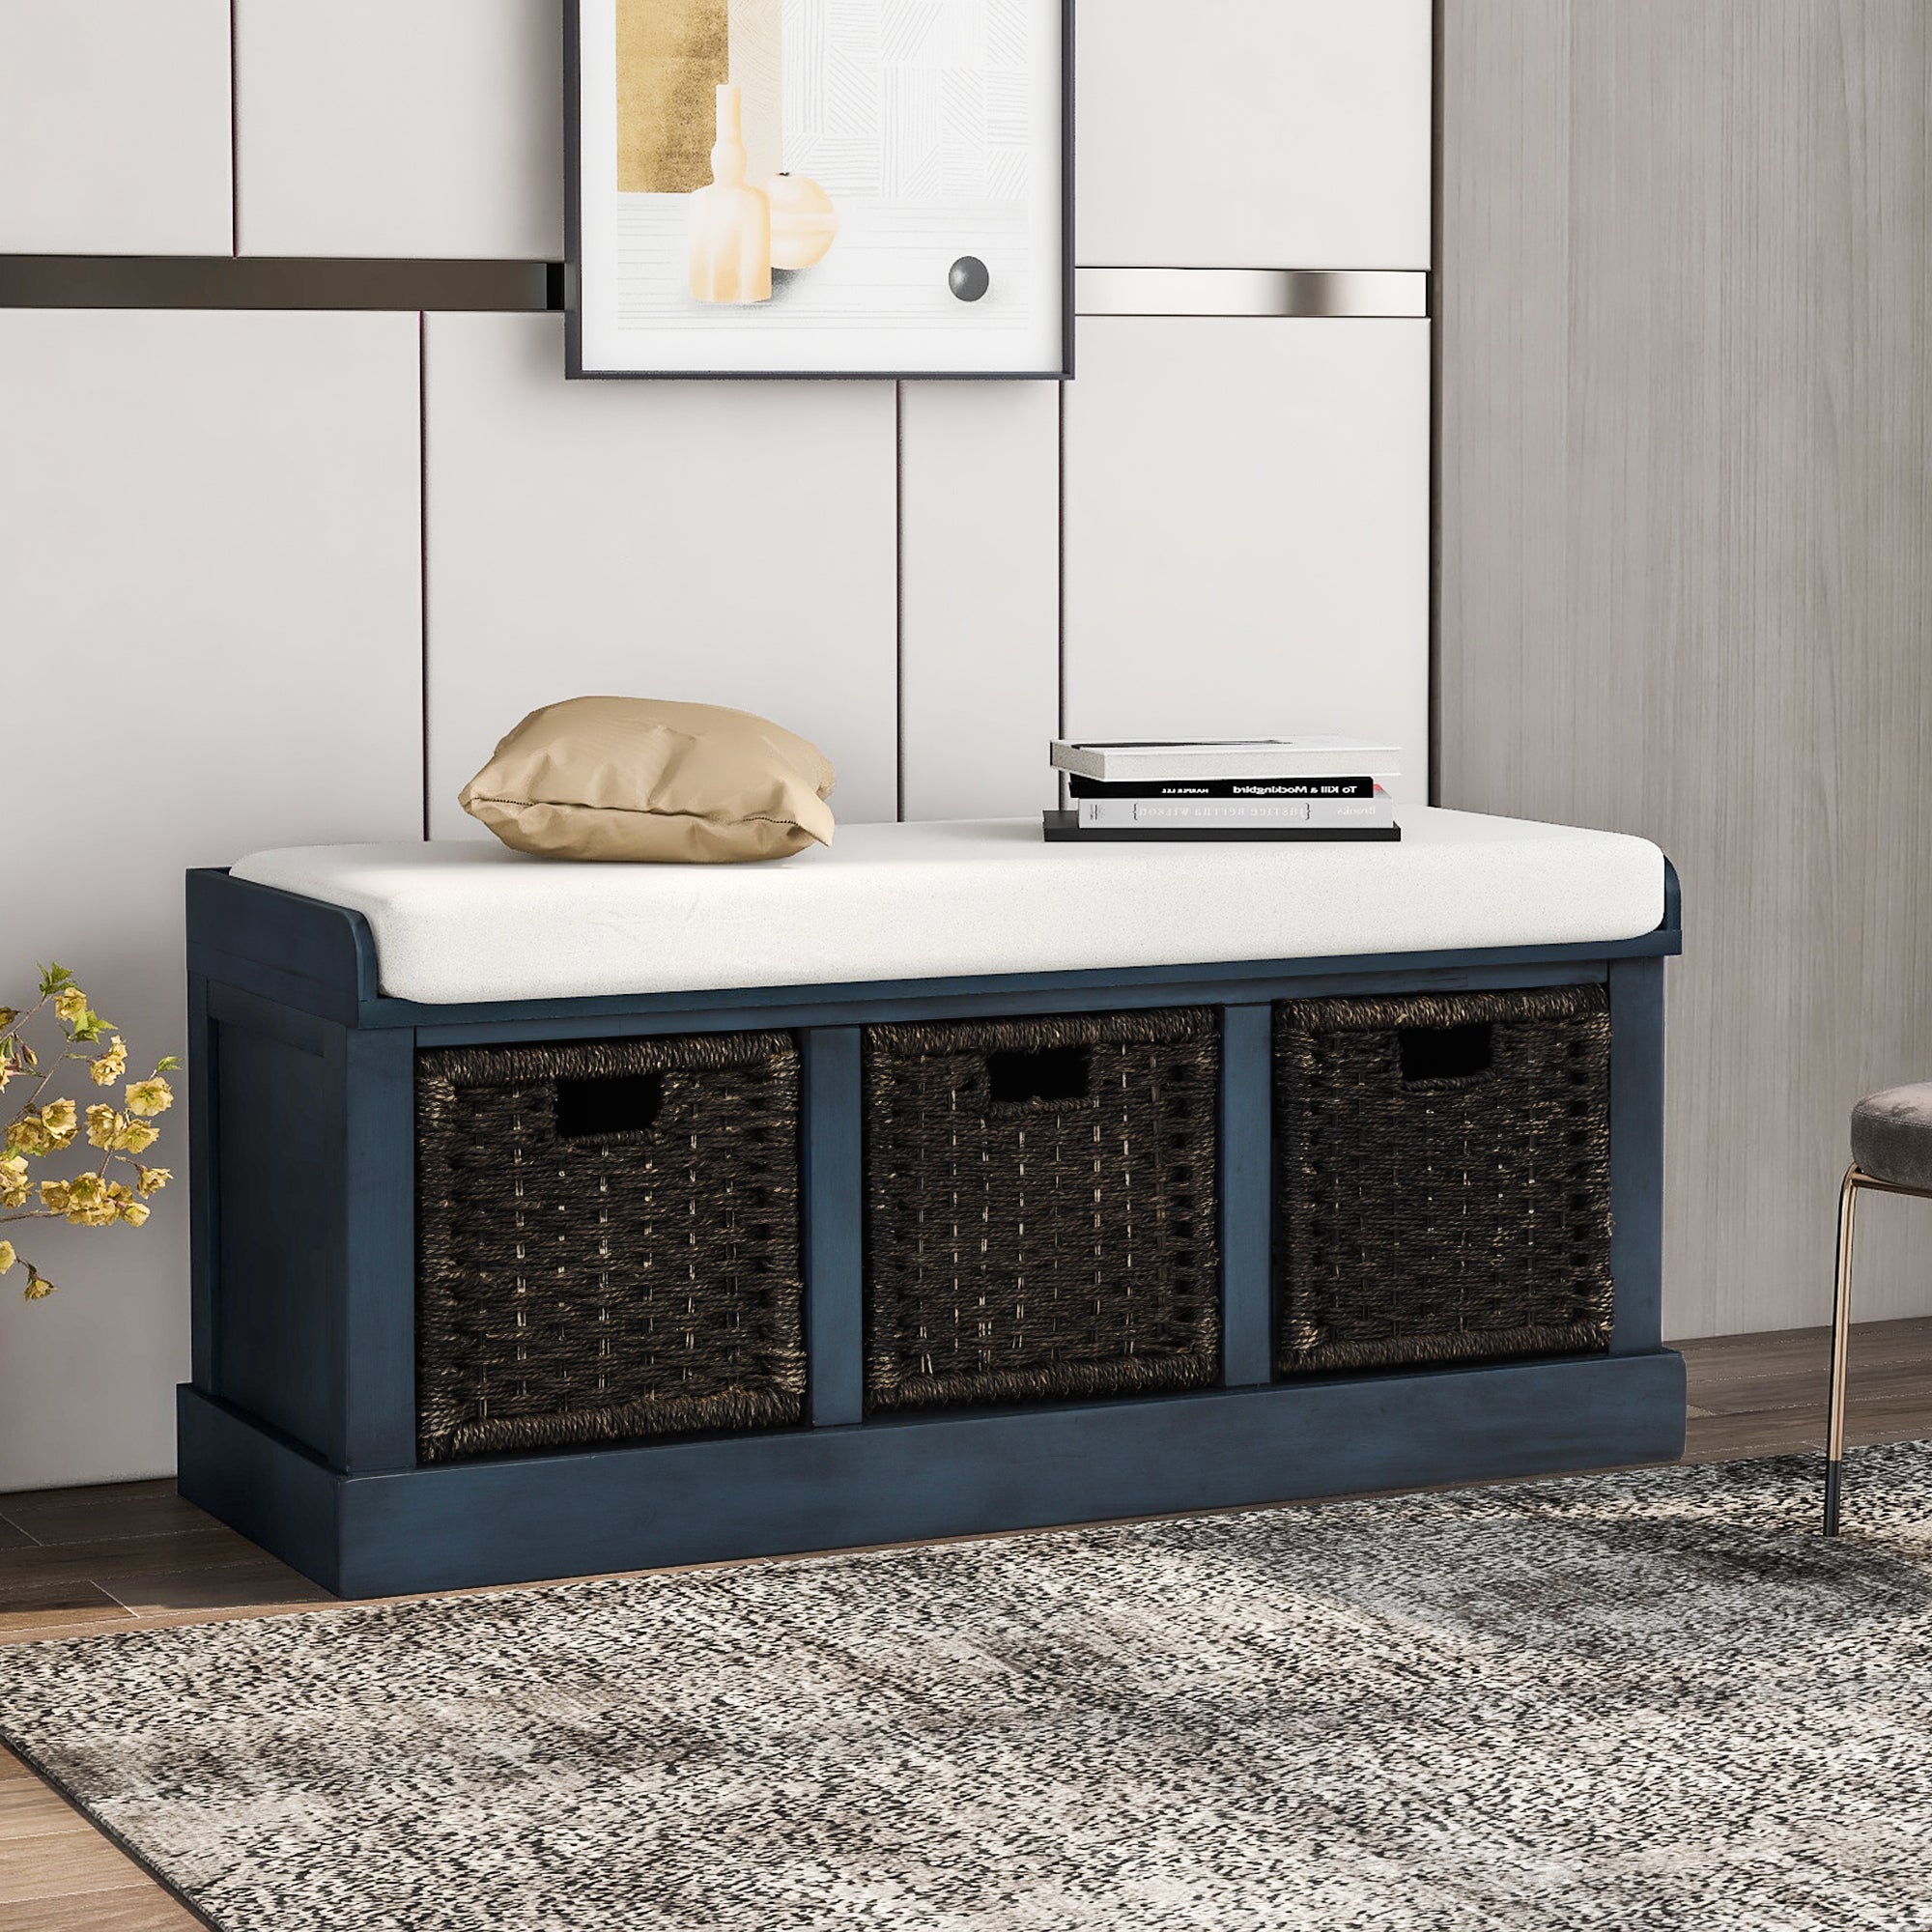 TREXM Rustic Storage Bench with 3 Detachable Classic Rattan Baskets (Antique Navy)